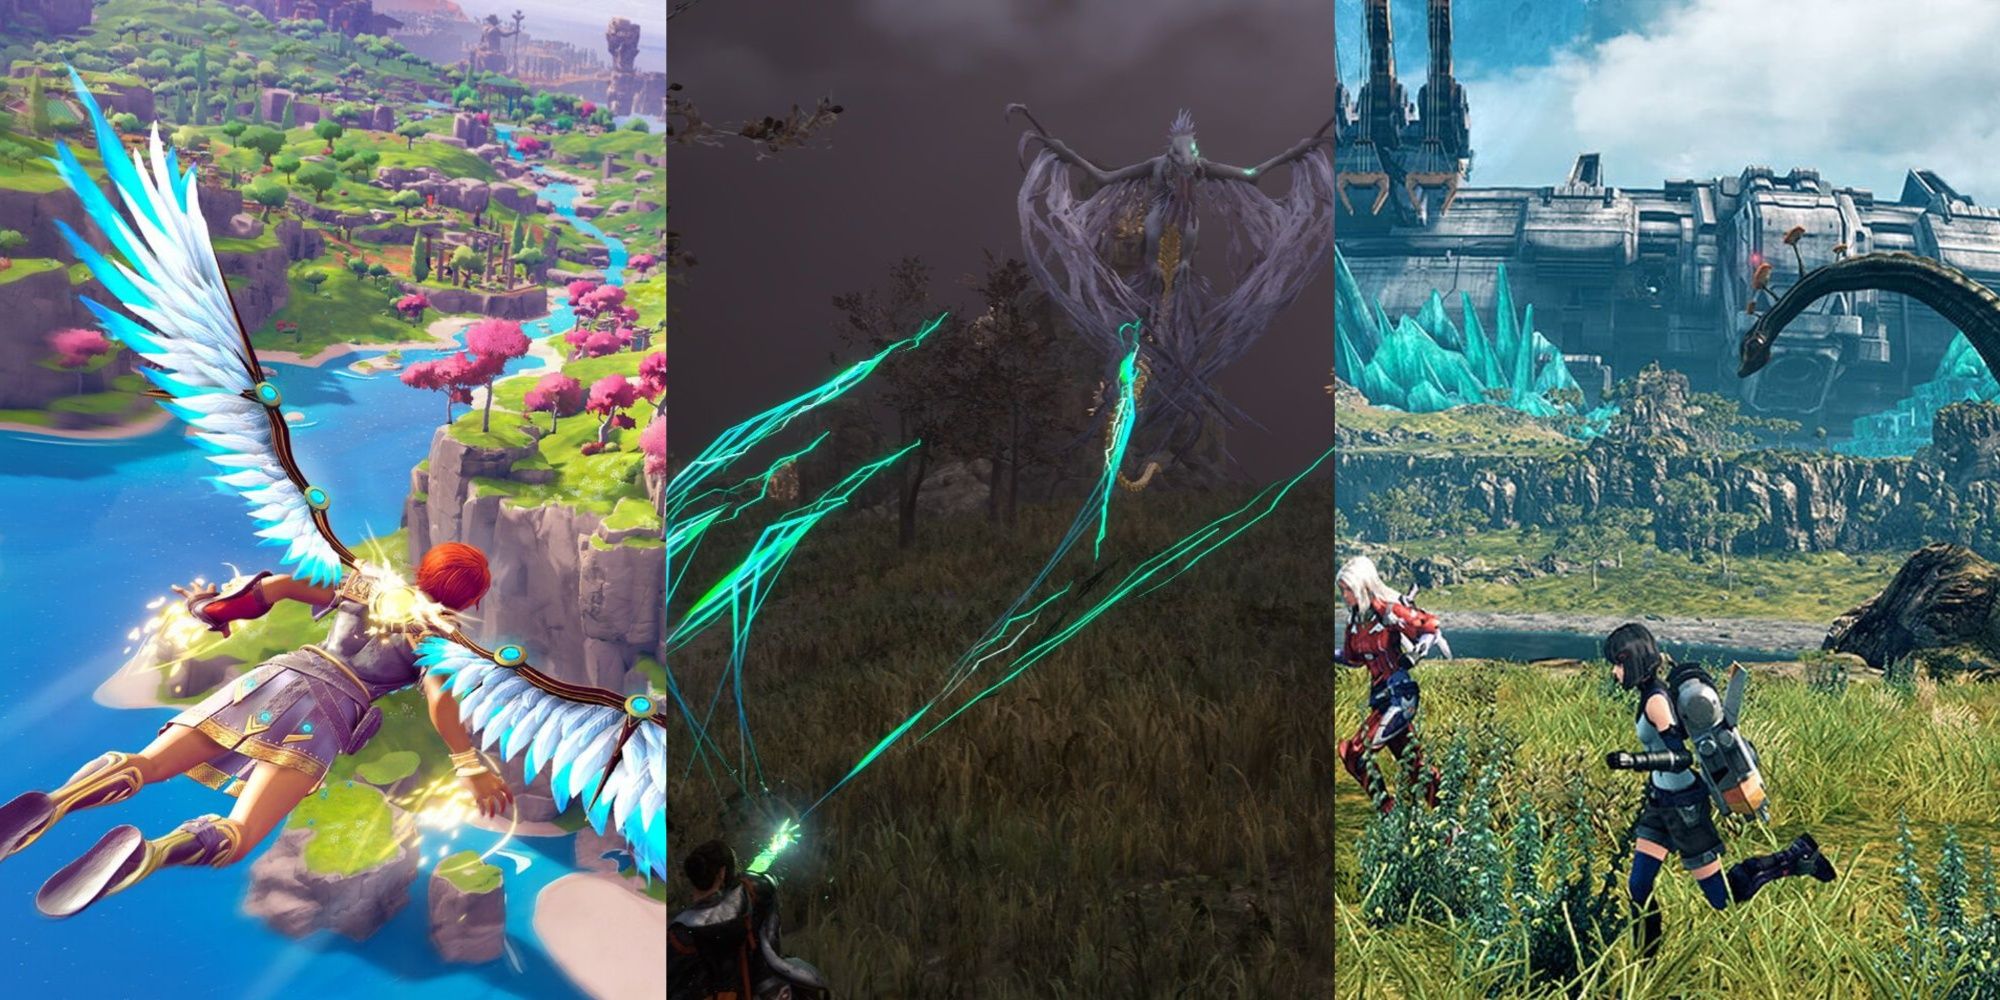 A collage showing gameplay from Immortal Fenyx Rising, Forspoken, and Xenoblade Chronicles 3.